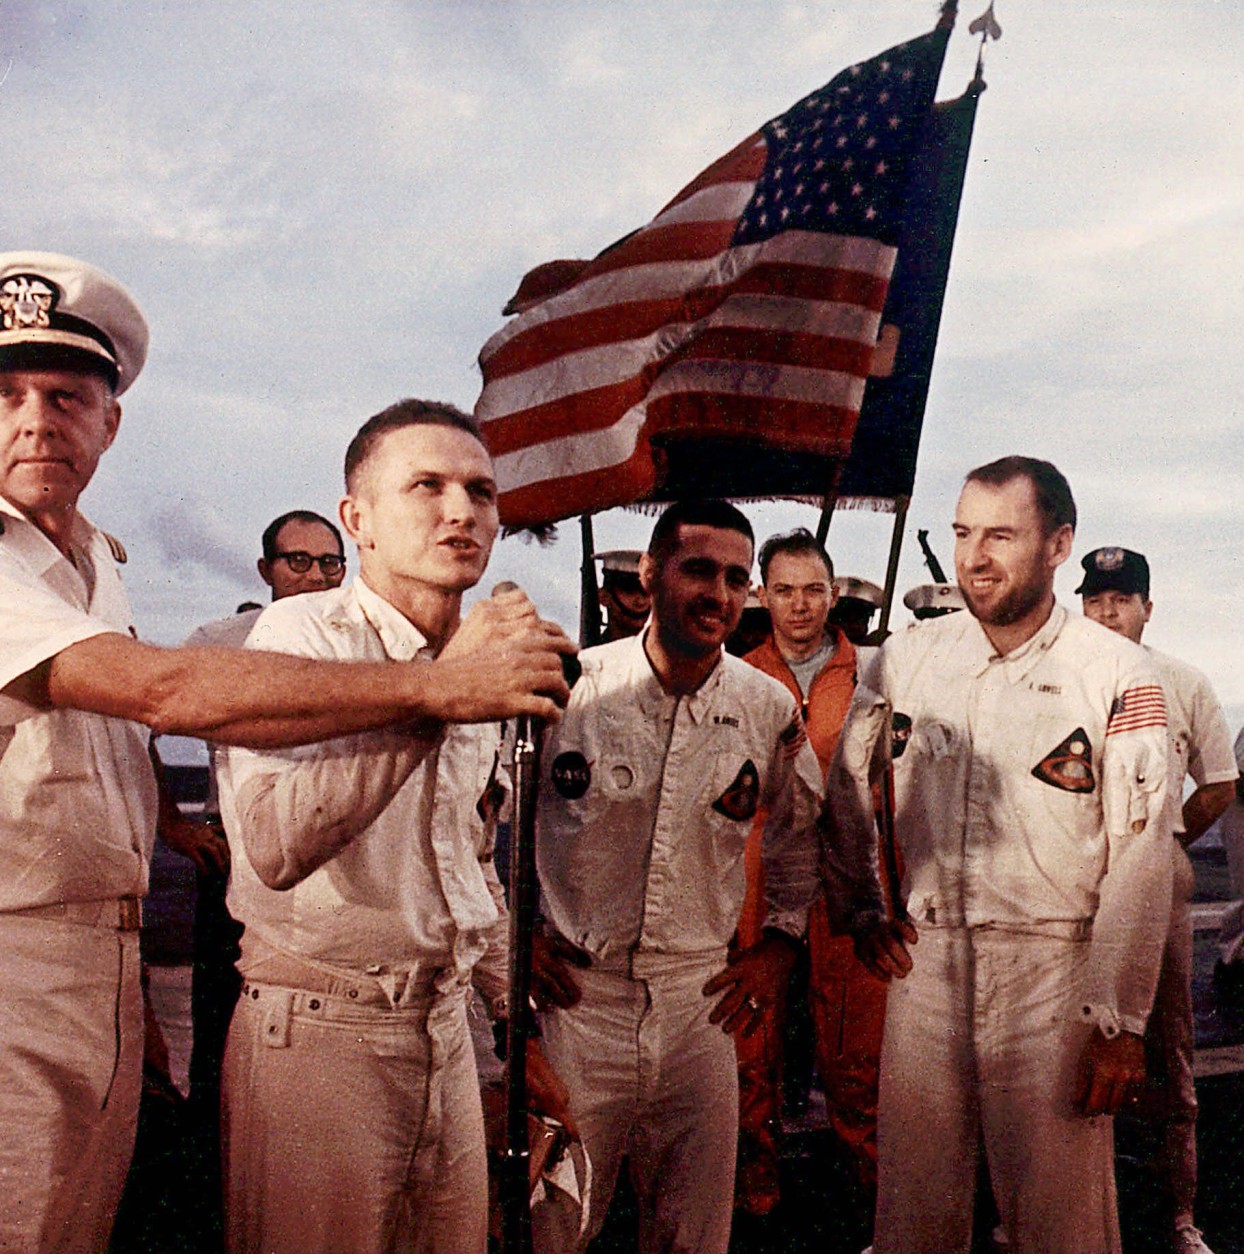 Apollo 8 Spacecraft commander Frank Borman addresses the crew of the USS Yorktown while Apollo 8 astronauts Bill Anders, center, and Jim Lovell, right, look on following a flawless lunar orbital mission and recover in the Pacific Ocean some 1,000 miles Southwest of Hawaii, Dec. 27, 1968. Navy officer at left is unidentified. (AP Photo/Four Walls Eight Windows, Nasa)